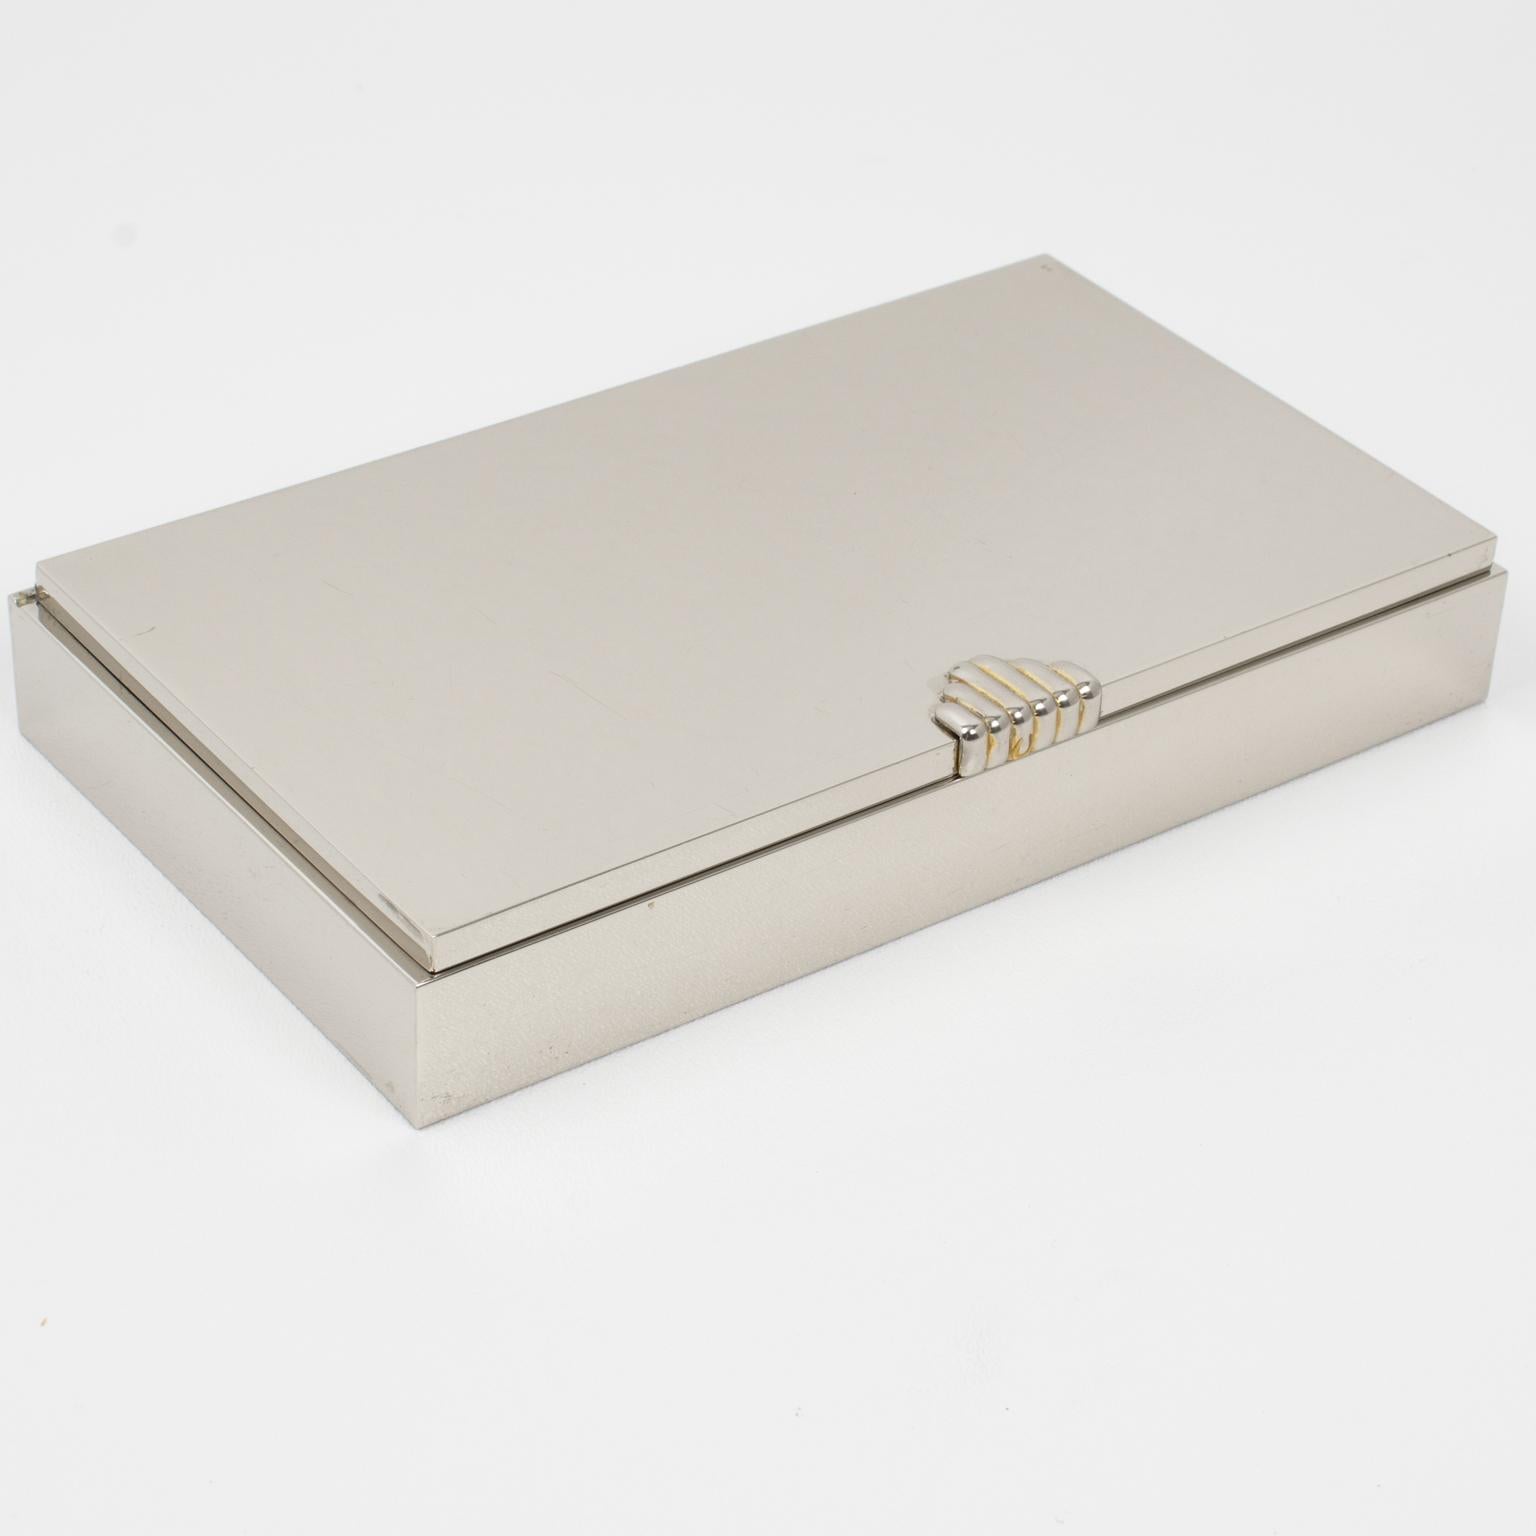 Maison Lancel Paris designed and crafted this stylish decorative lidded box in the 1980s. The minimalist rectangular shape has a sleek design with polished chromed metal complemented gold plated application on the carved handle to increase the